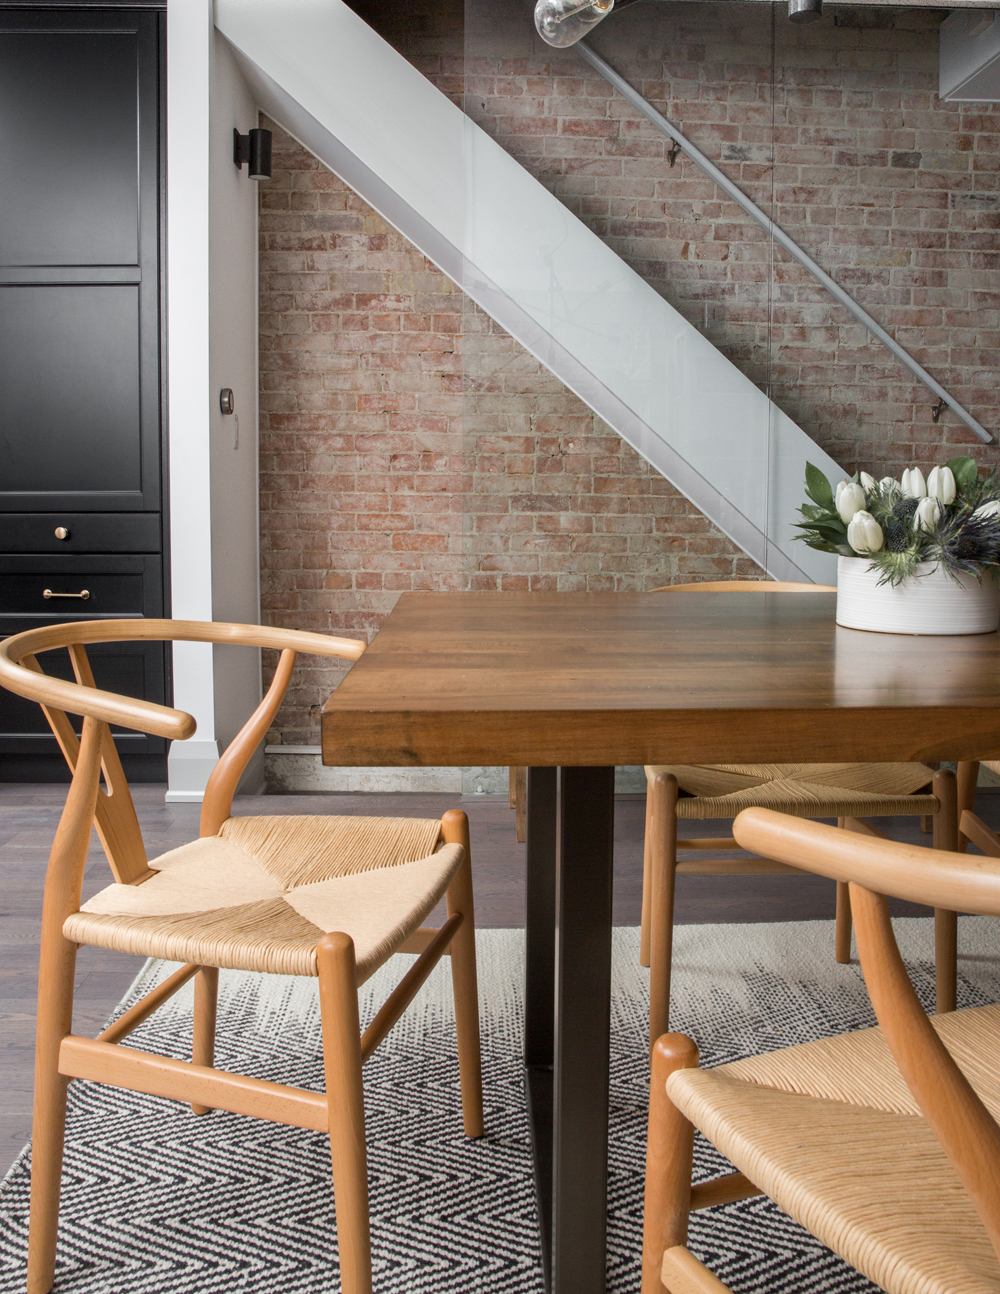 A stylish kitchen with exposed brick and a hidden staircase that leads down into the basement